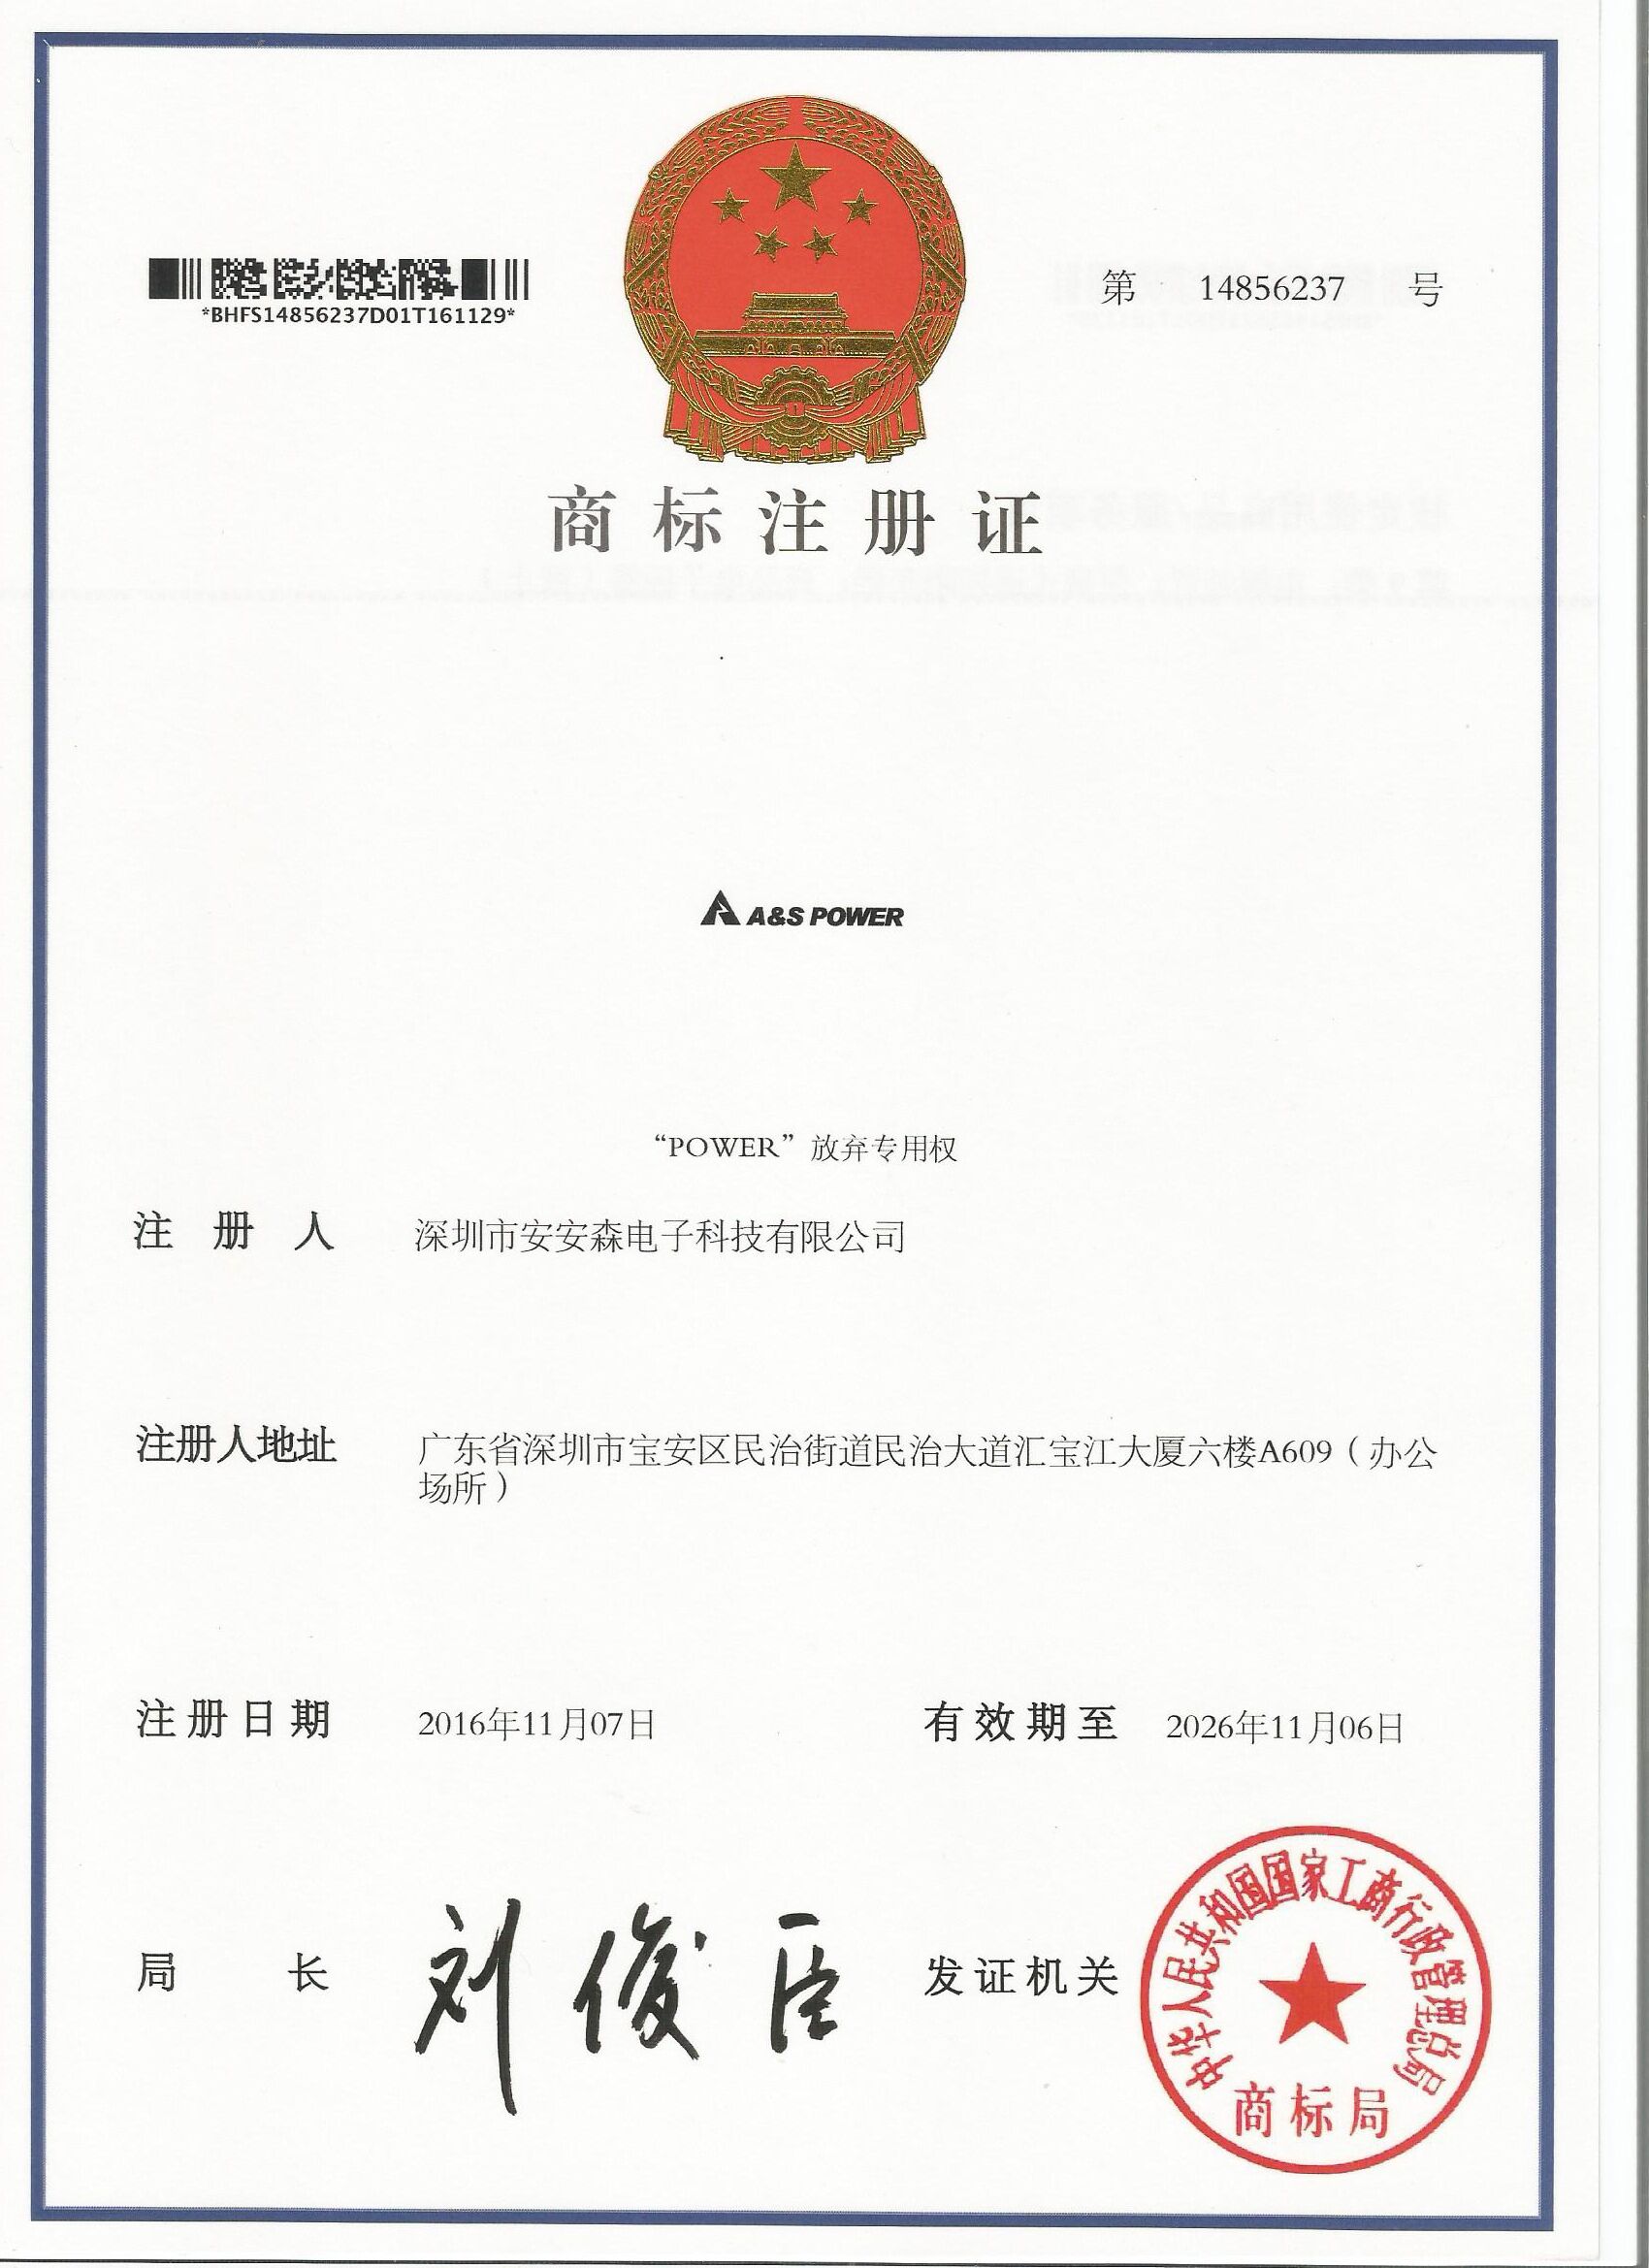 A&S Power Chinese Trademark